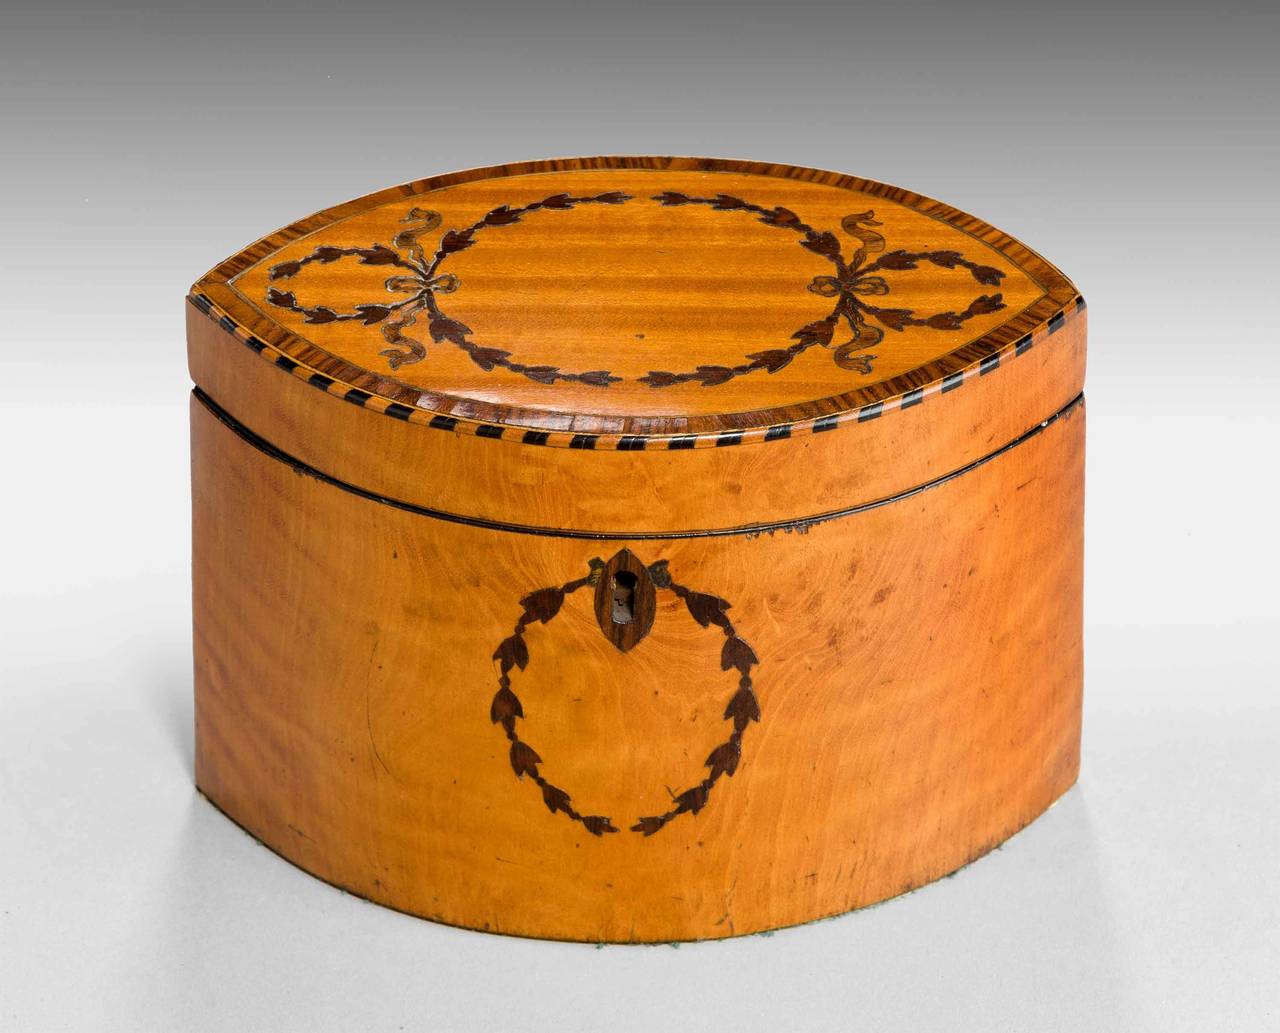 A fine 18th century inlaid Satinwood oval tea caddy with lid.

RR.